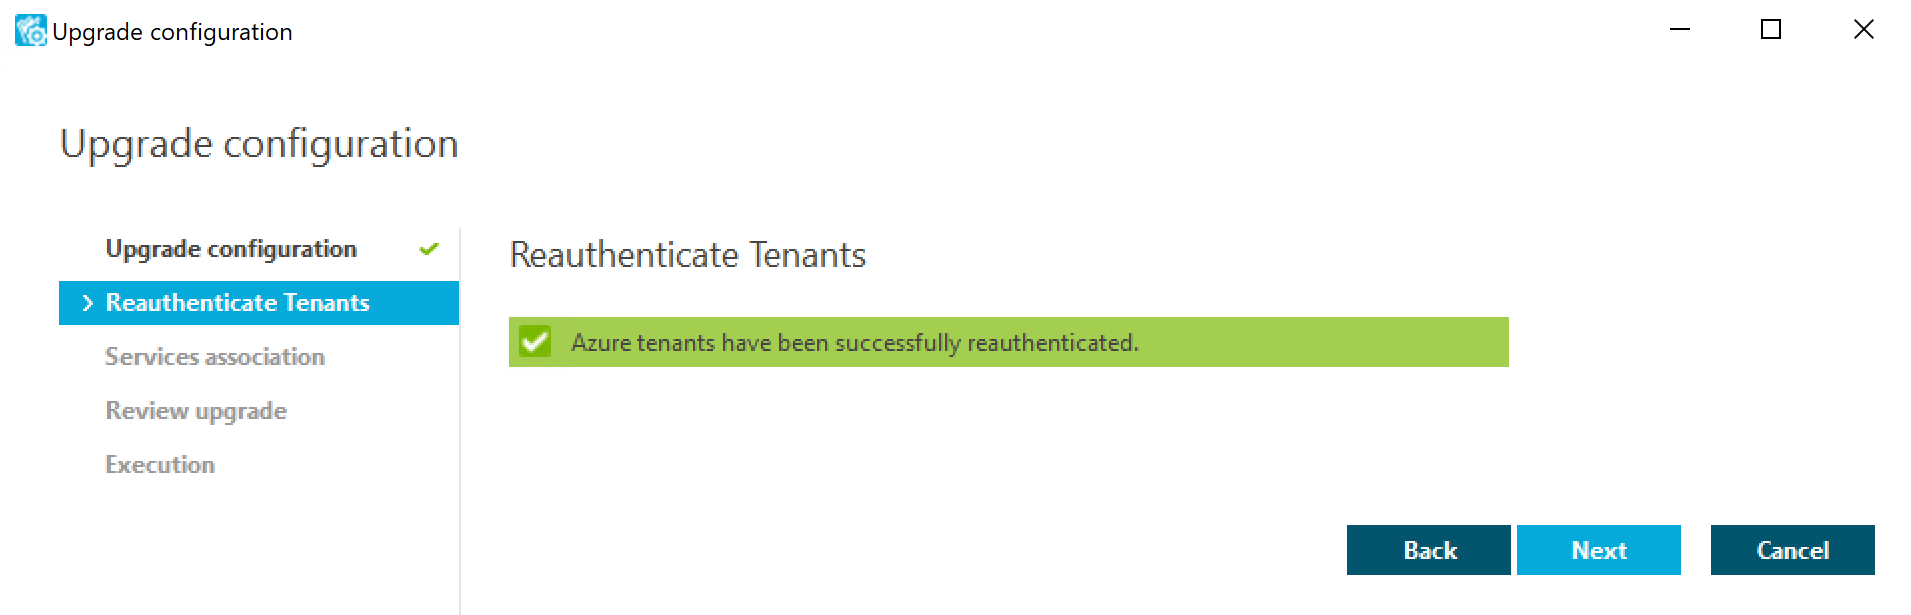 Confirmation message after successfully reauthenticating tenants in the Upgrade configuration wizard of the Configuration Center.